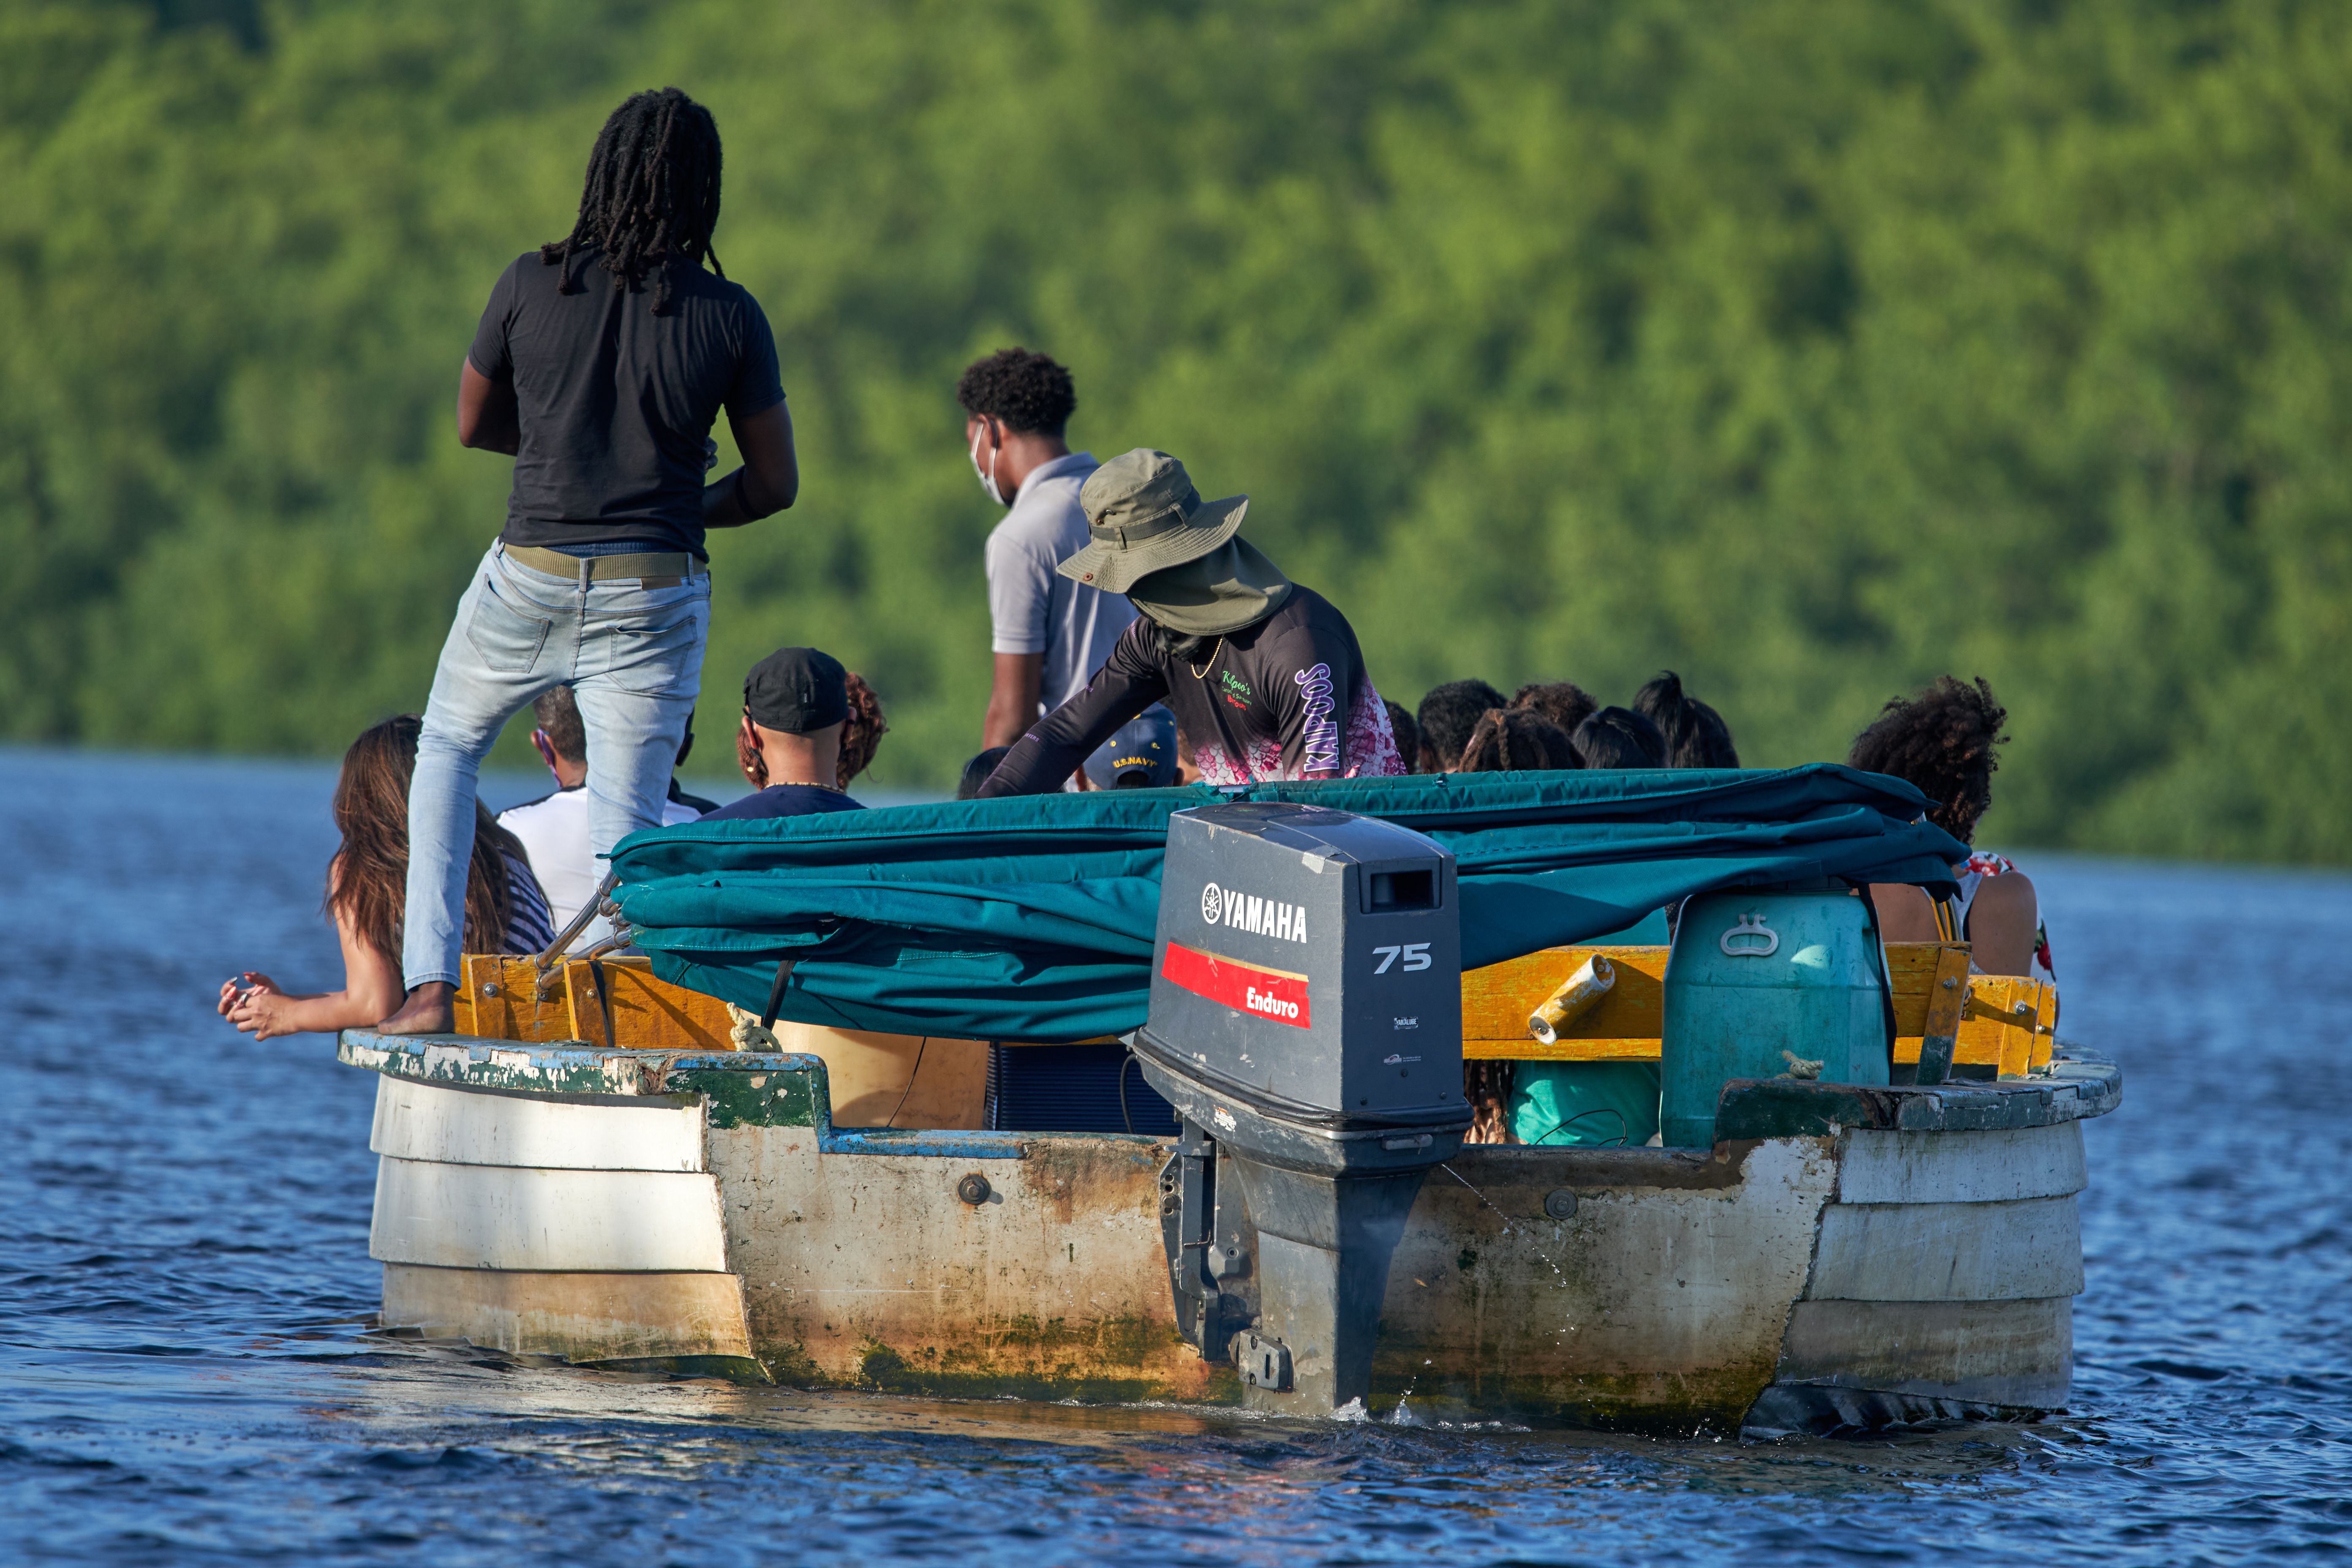 A group of people on a small fishing boat.